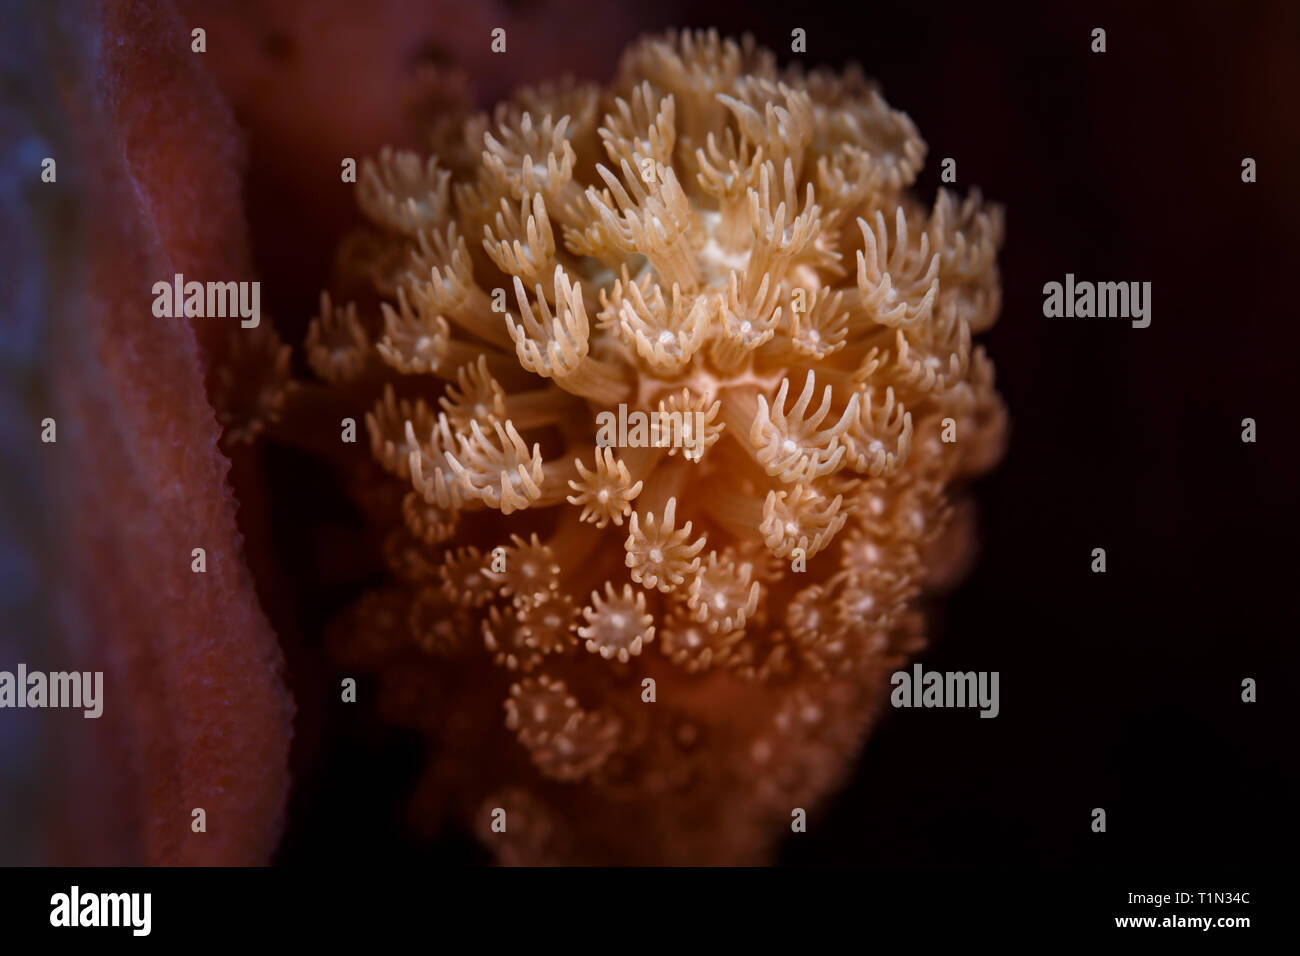 Closeup of white star like octocorallia polyps attached to  soft red coral Stock Photo